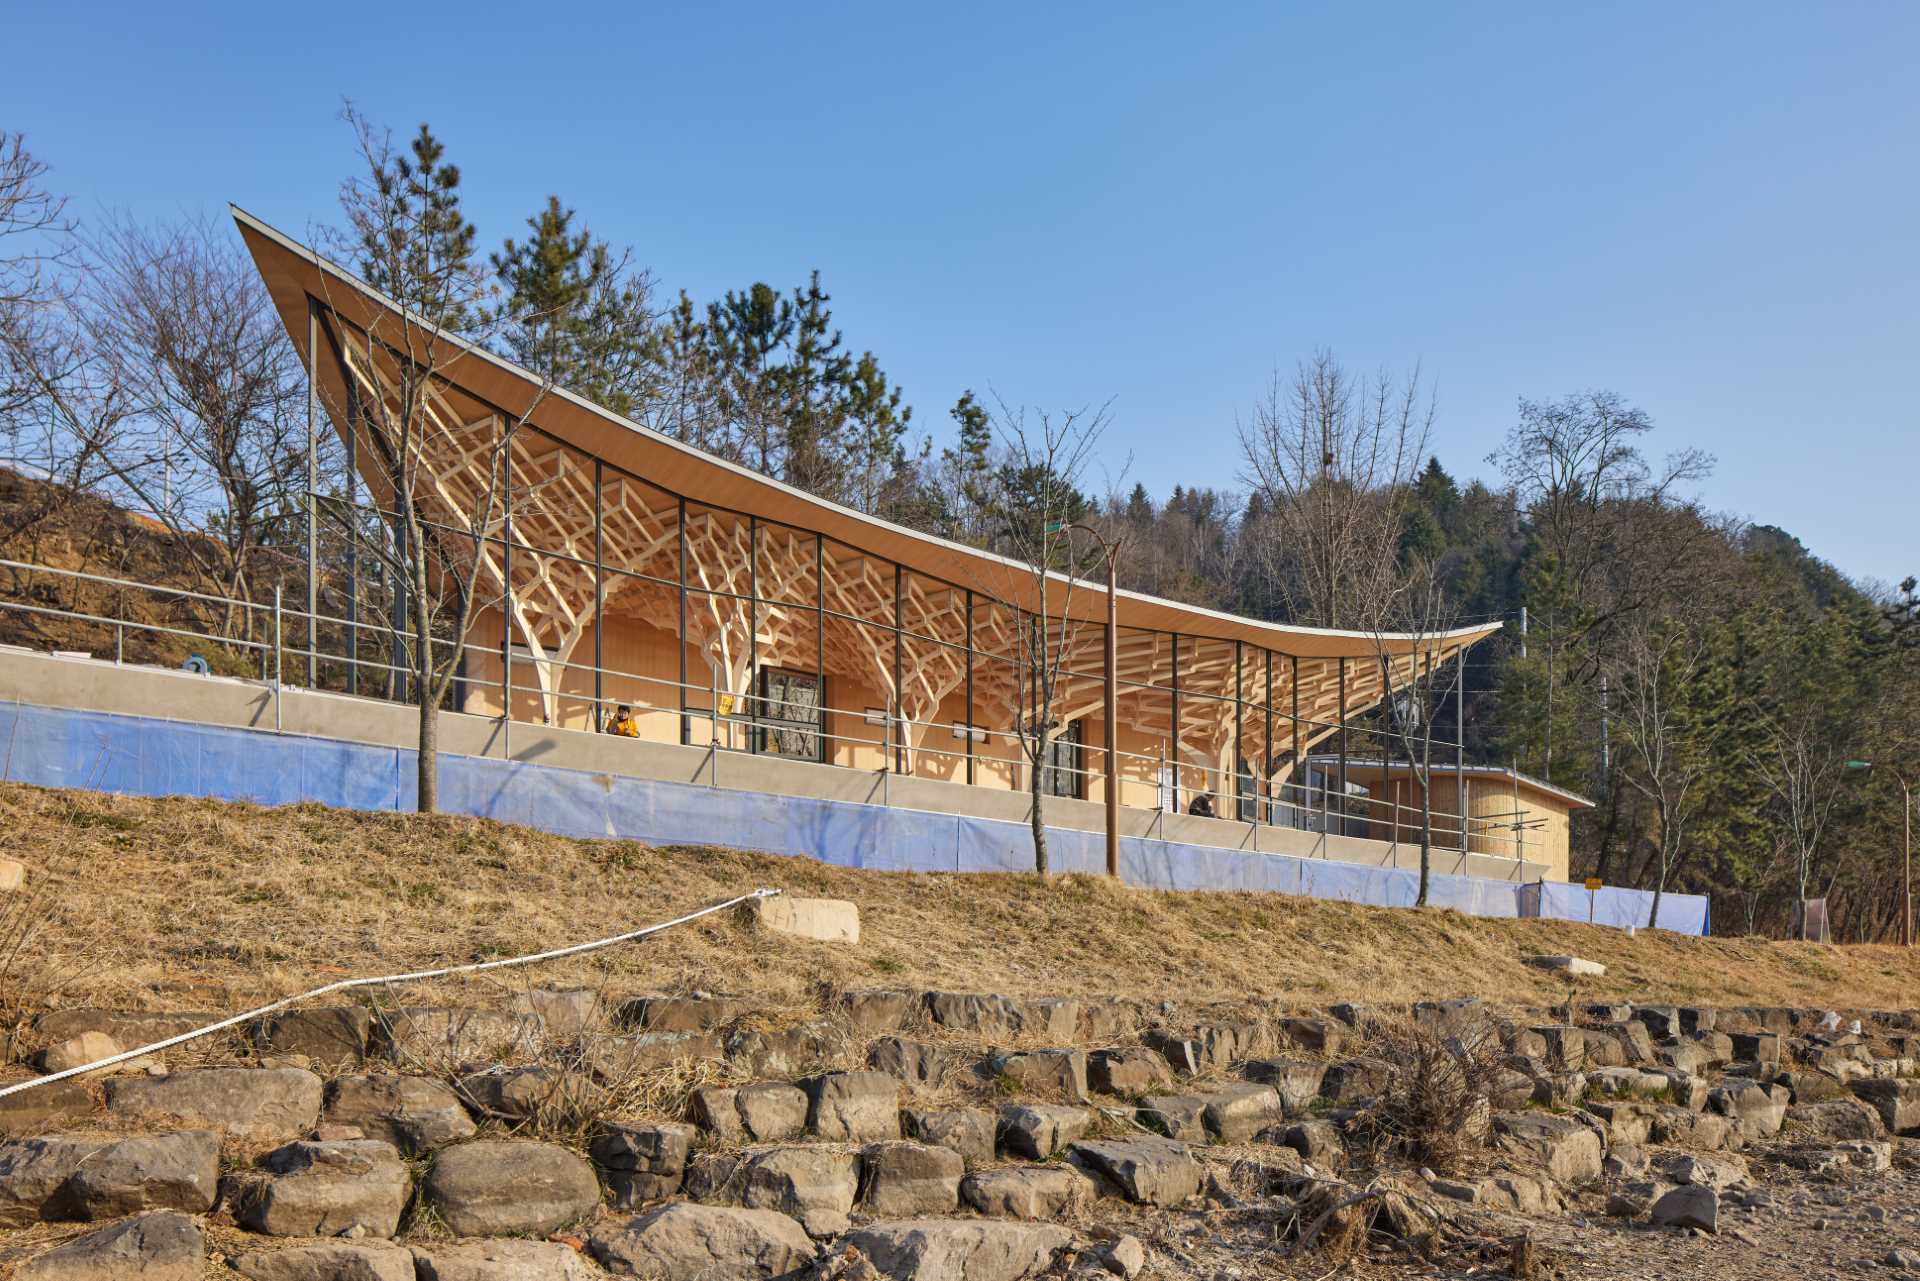 Six tree-like columns showcase wood craftsmanship inside a riverside pavilion with a glass front and curved roof.